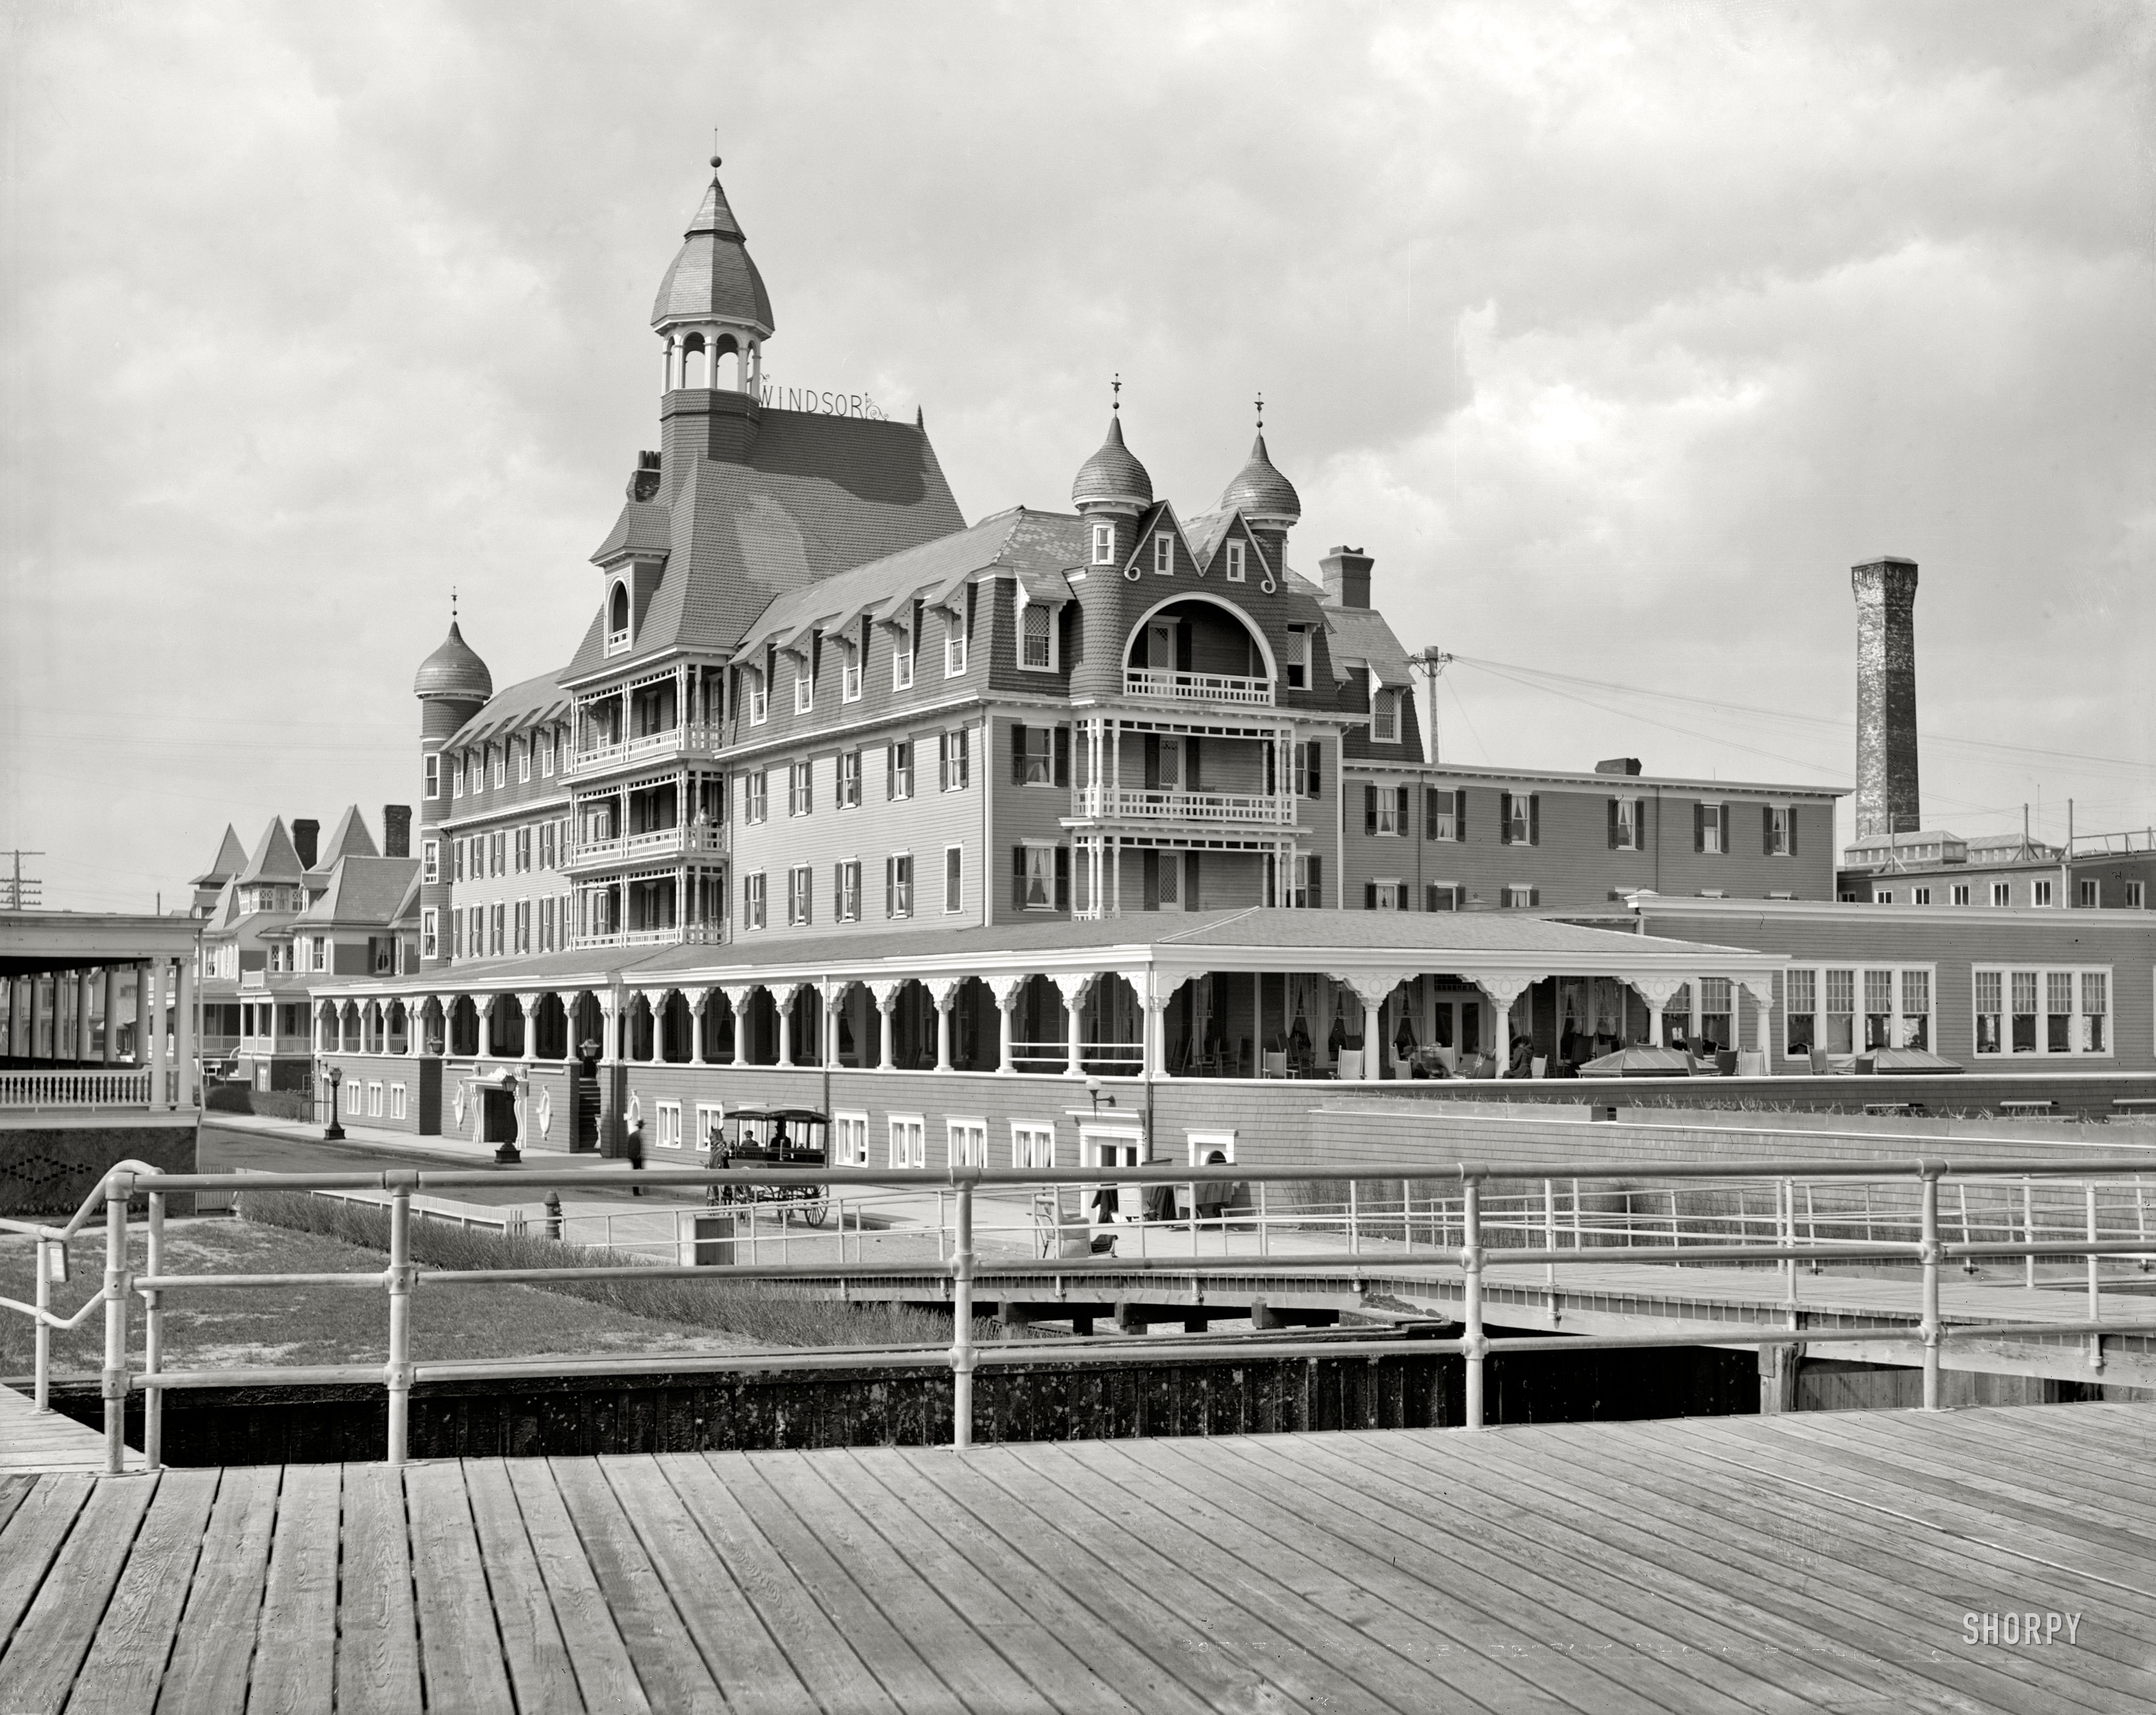 Atlantic City, New Jersey, circa 1906. "Hotel Windsor and Boardwalk." 8x10 inch dry plate glass negative, Detroit Publishing Company. View full size.